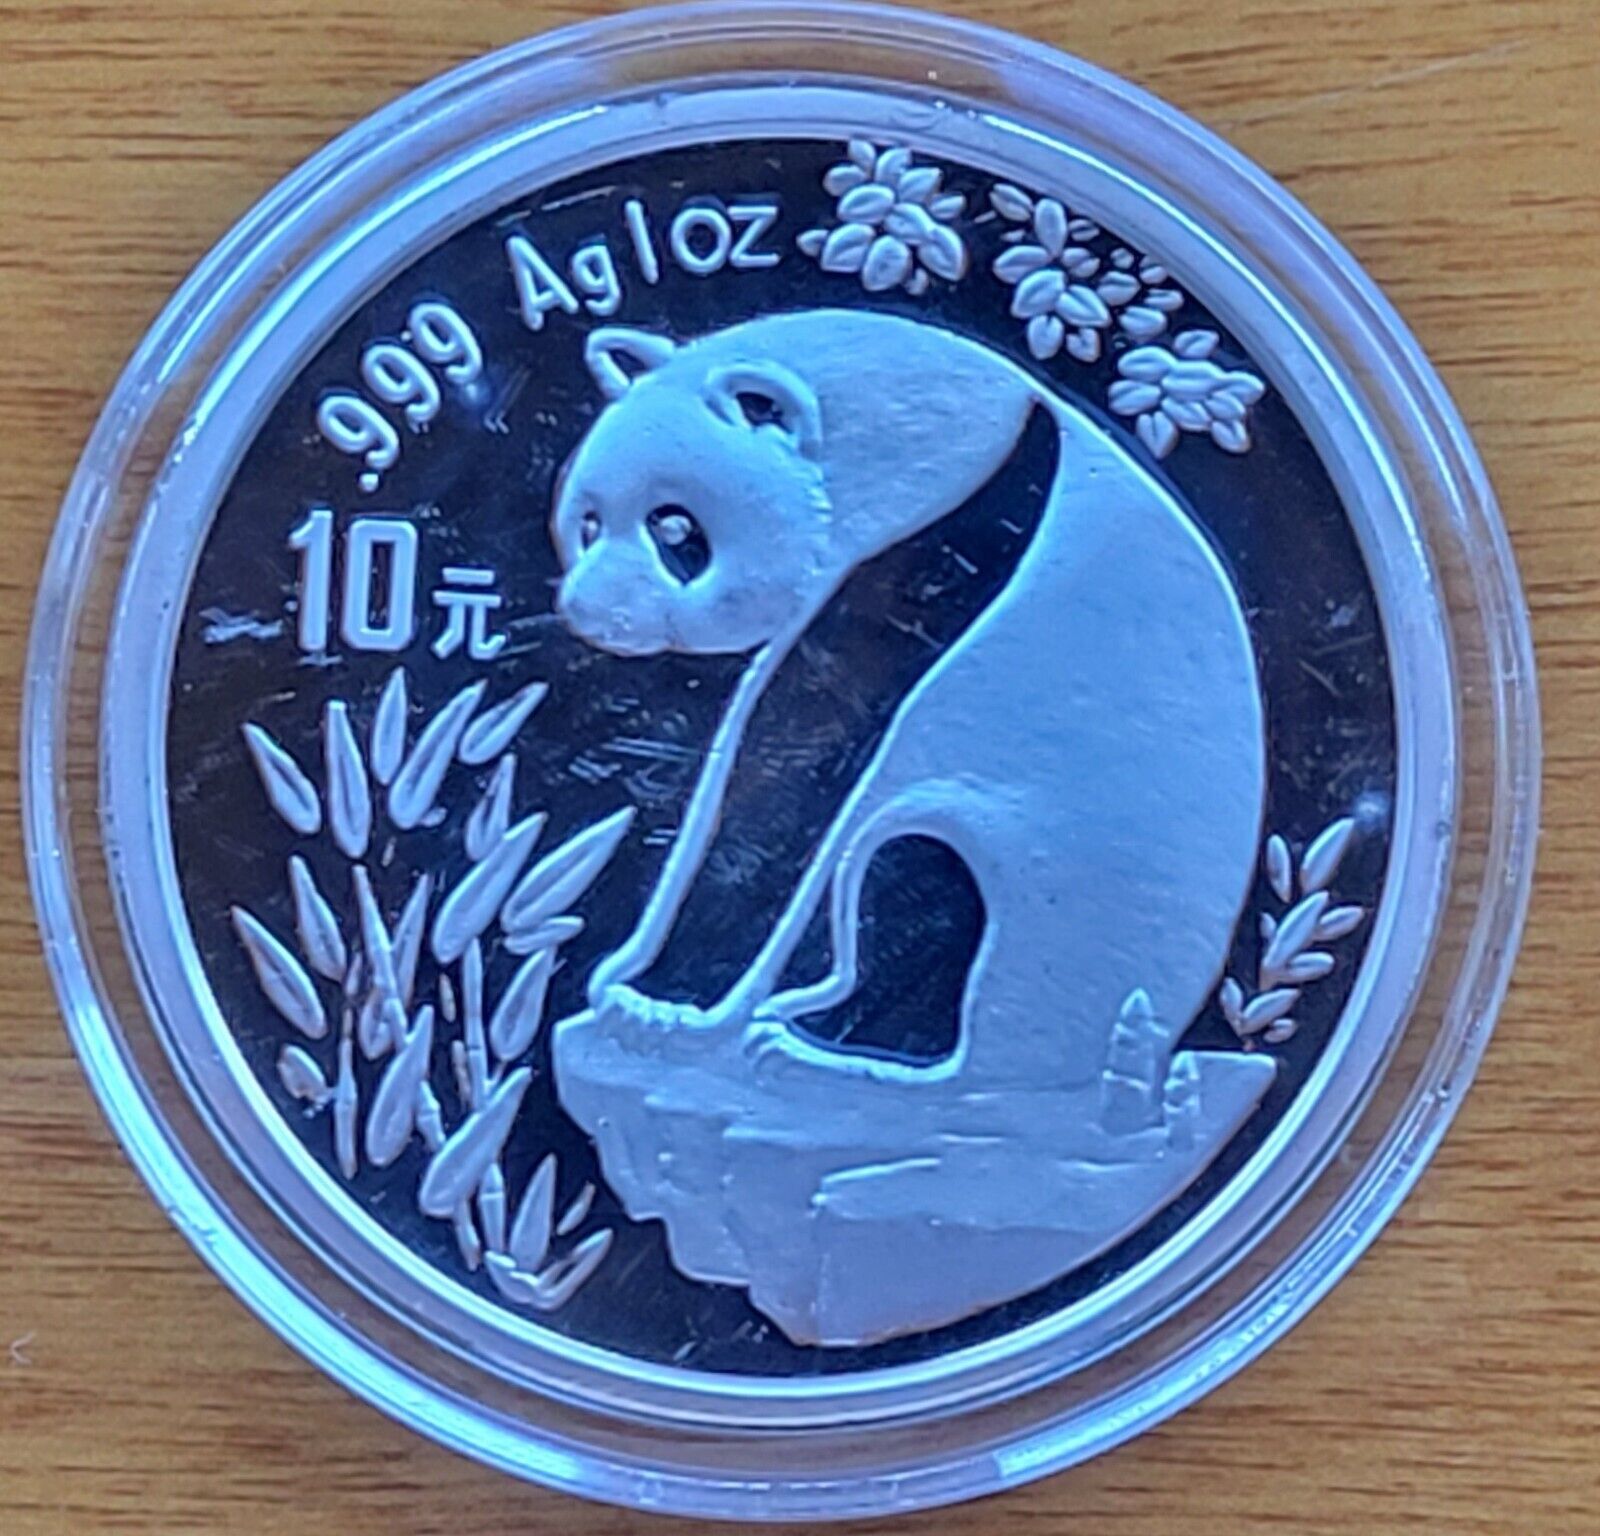 Primary image for CHINA 10 YUAN PANDA SILVER BULLION ROUND COIN 1993 PROOF SEE DESCRIPTION